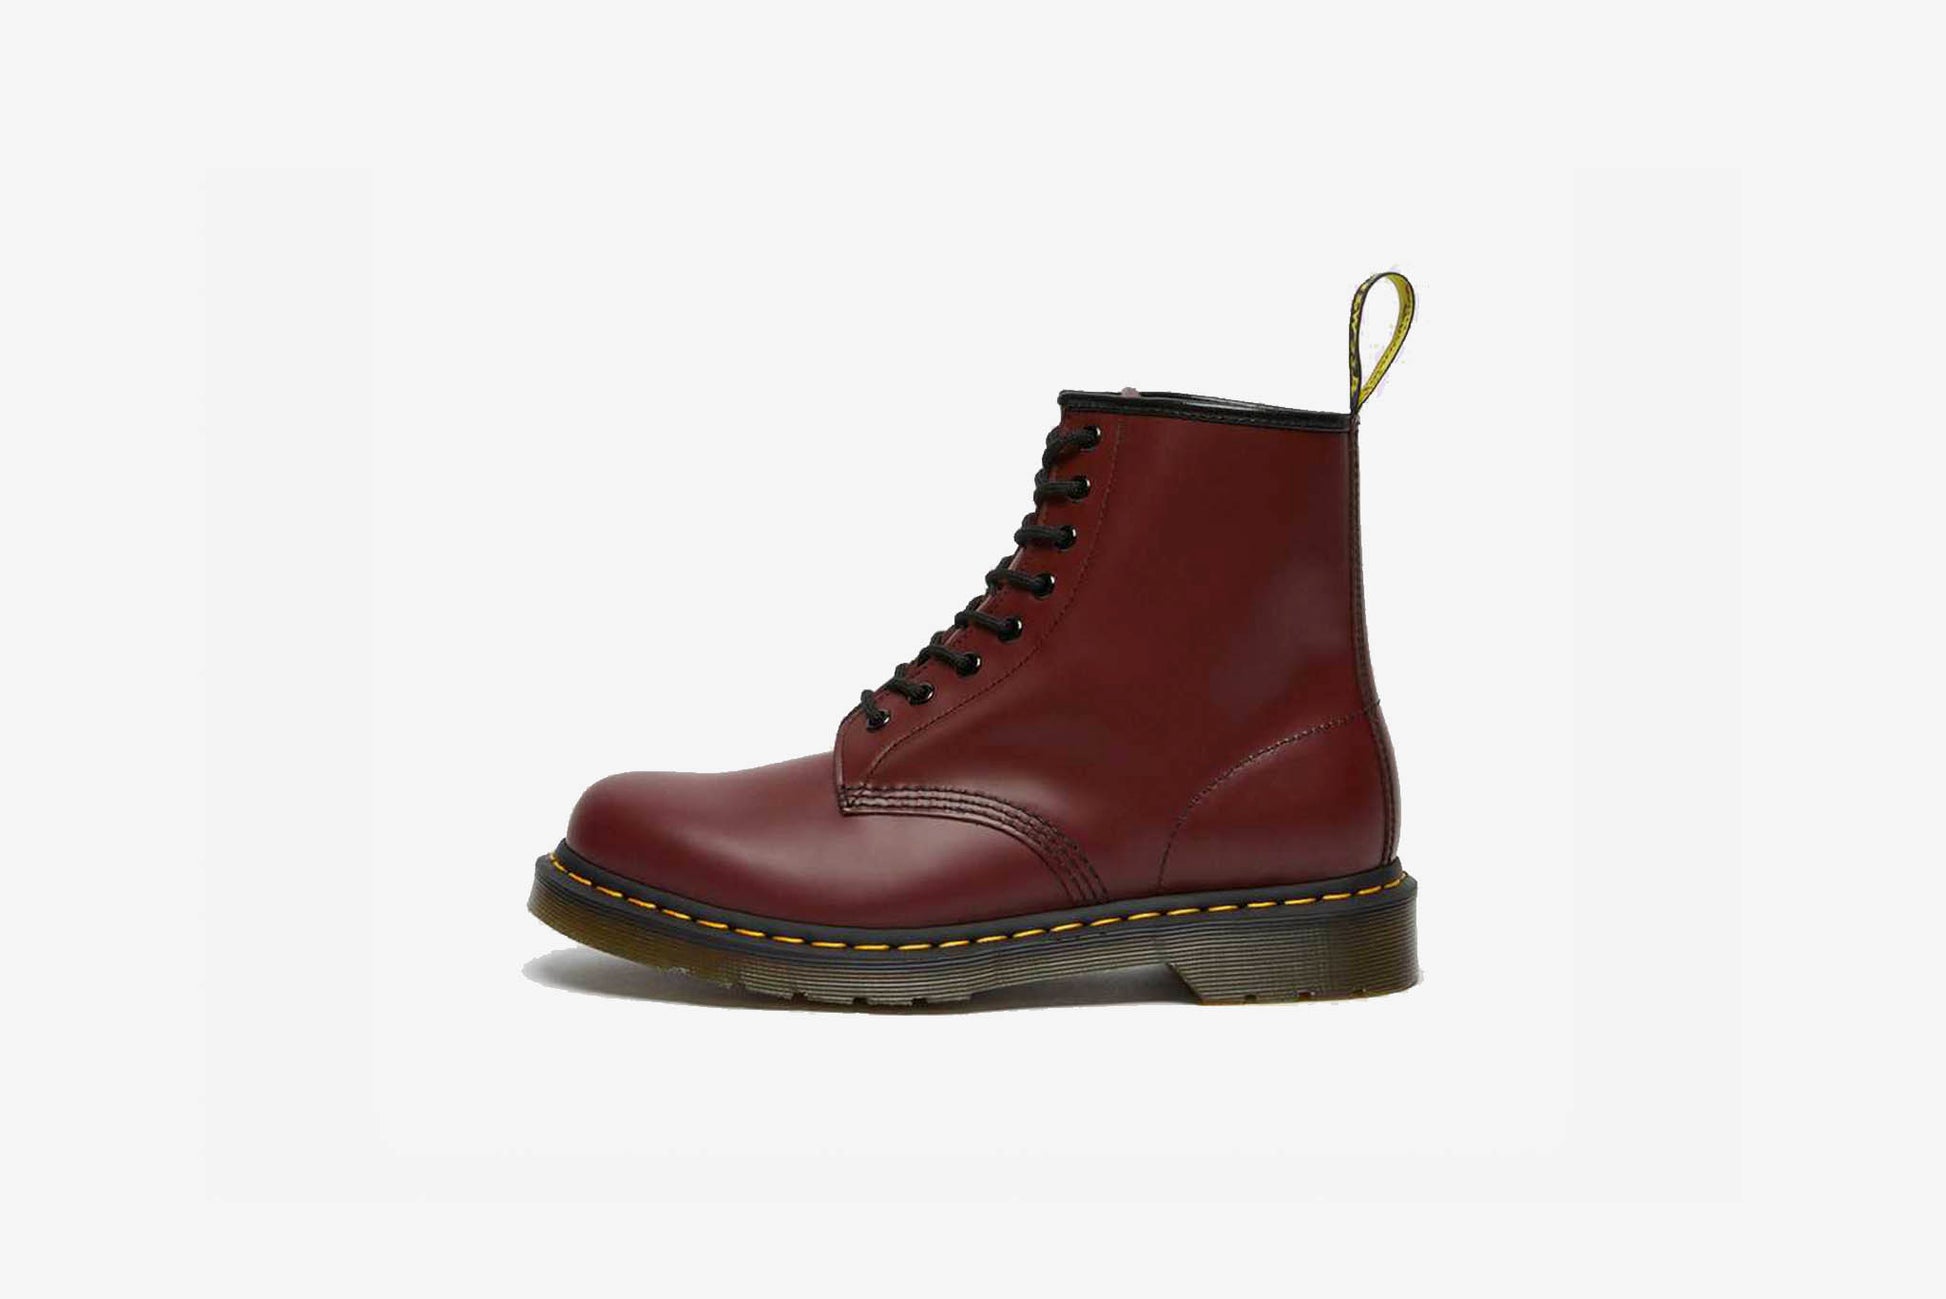 Dr. Martens "1460 Smooth Leather Up Boots" - Cherry –